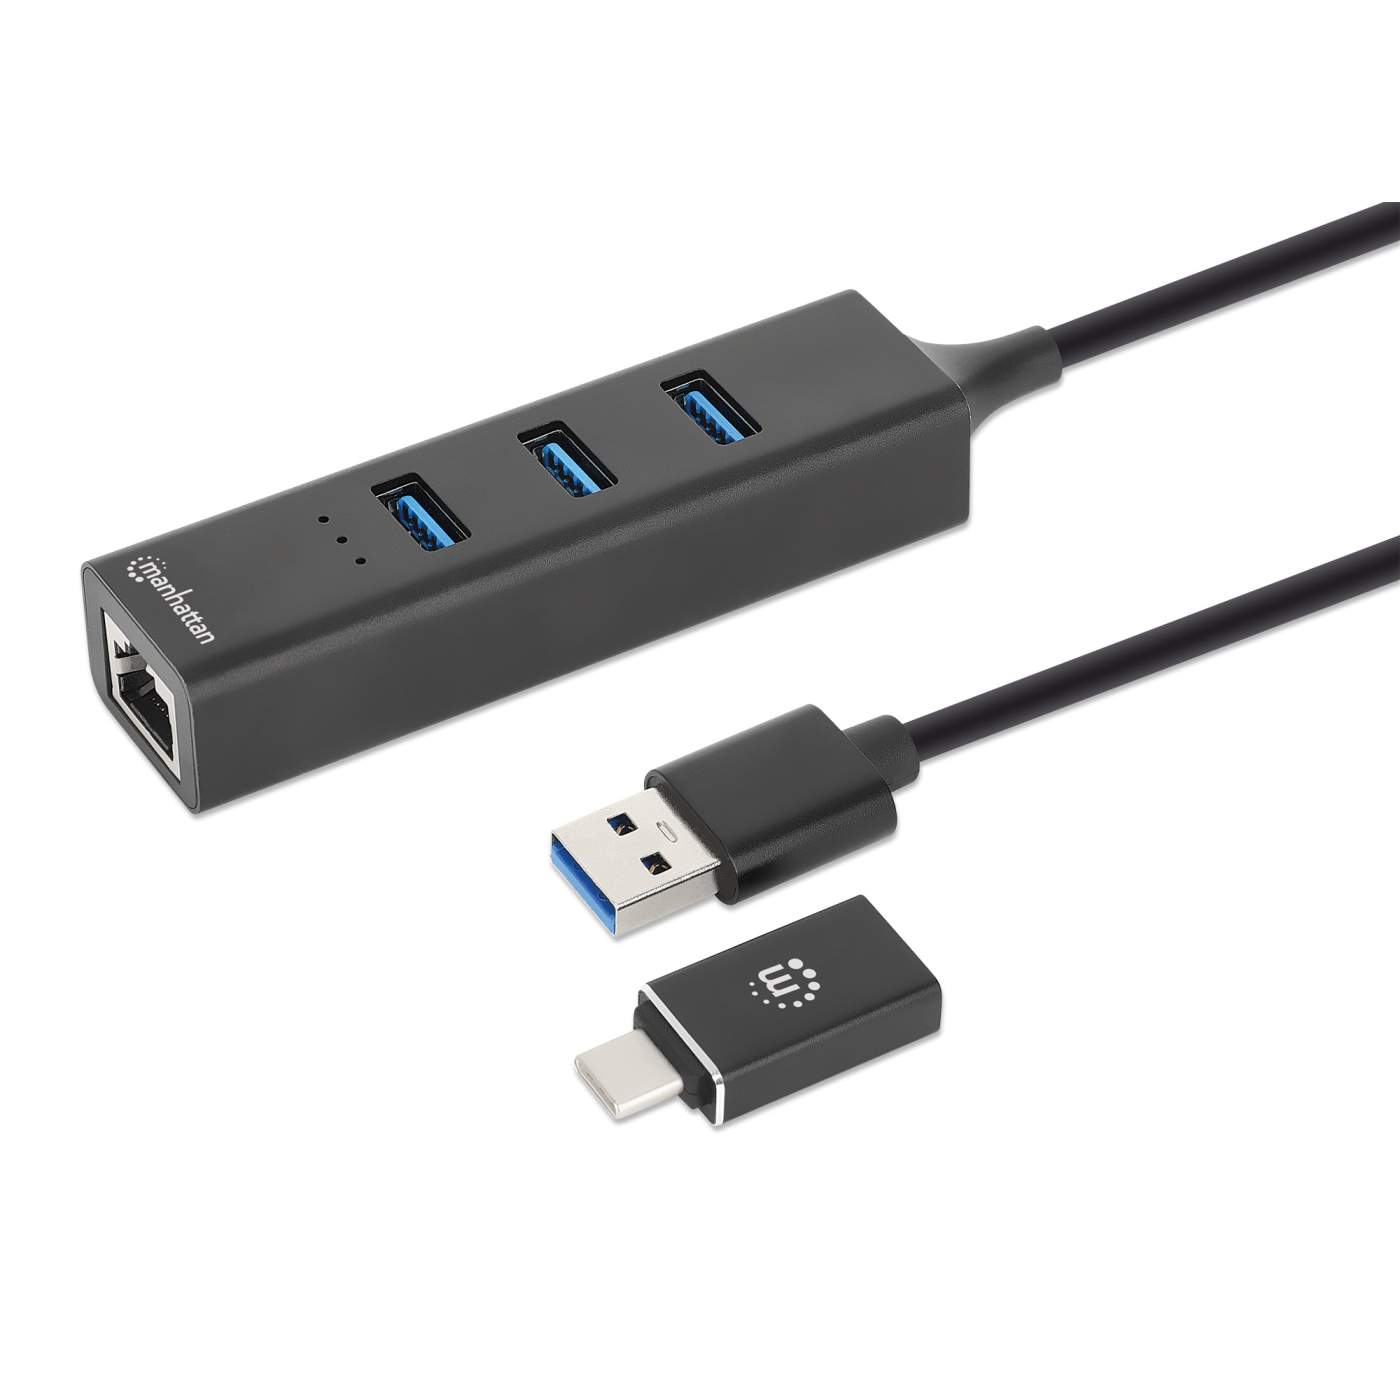  USB 3.0 to Ethernet Adapter 4 in 1 Multiport Hub with